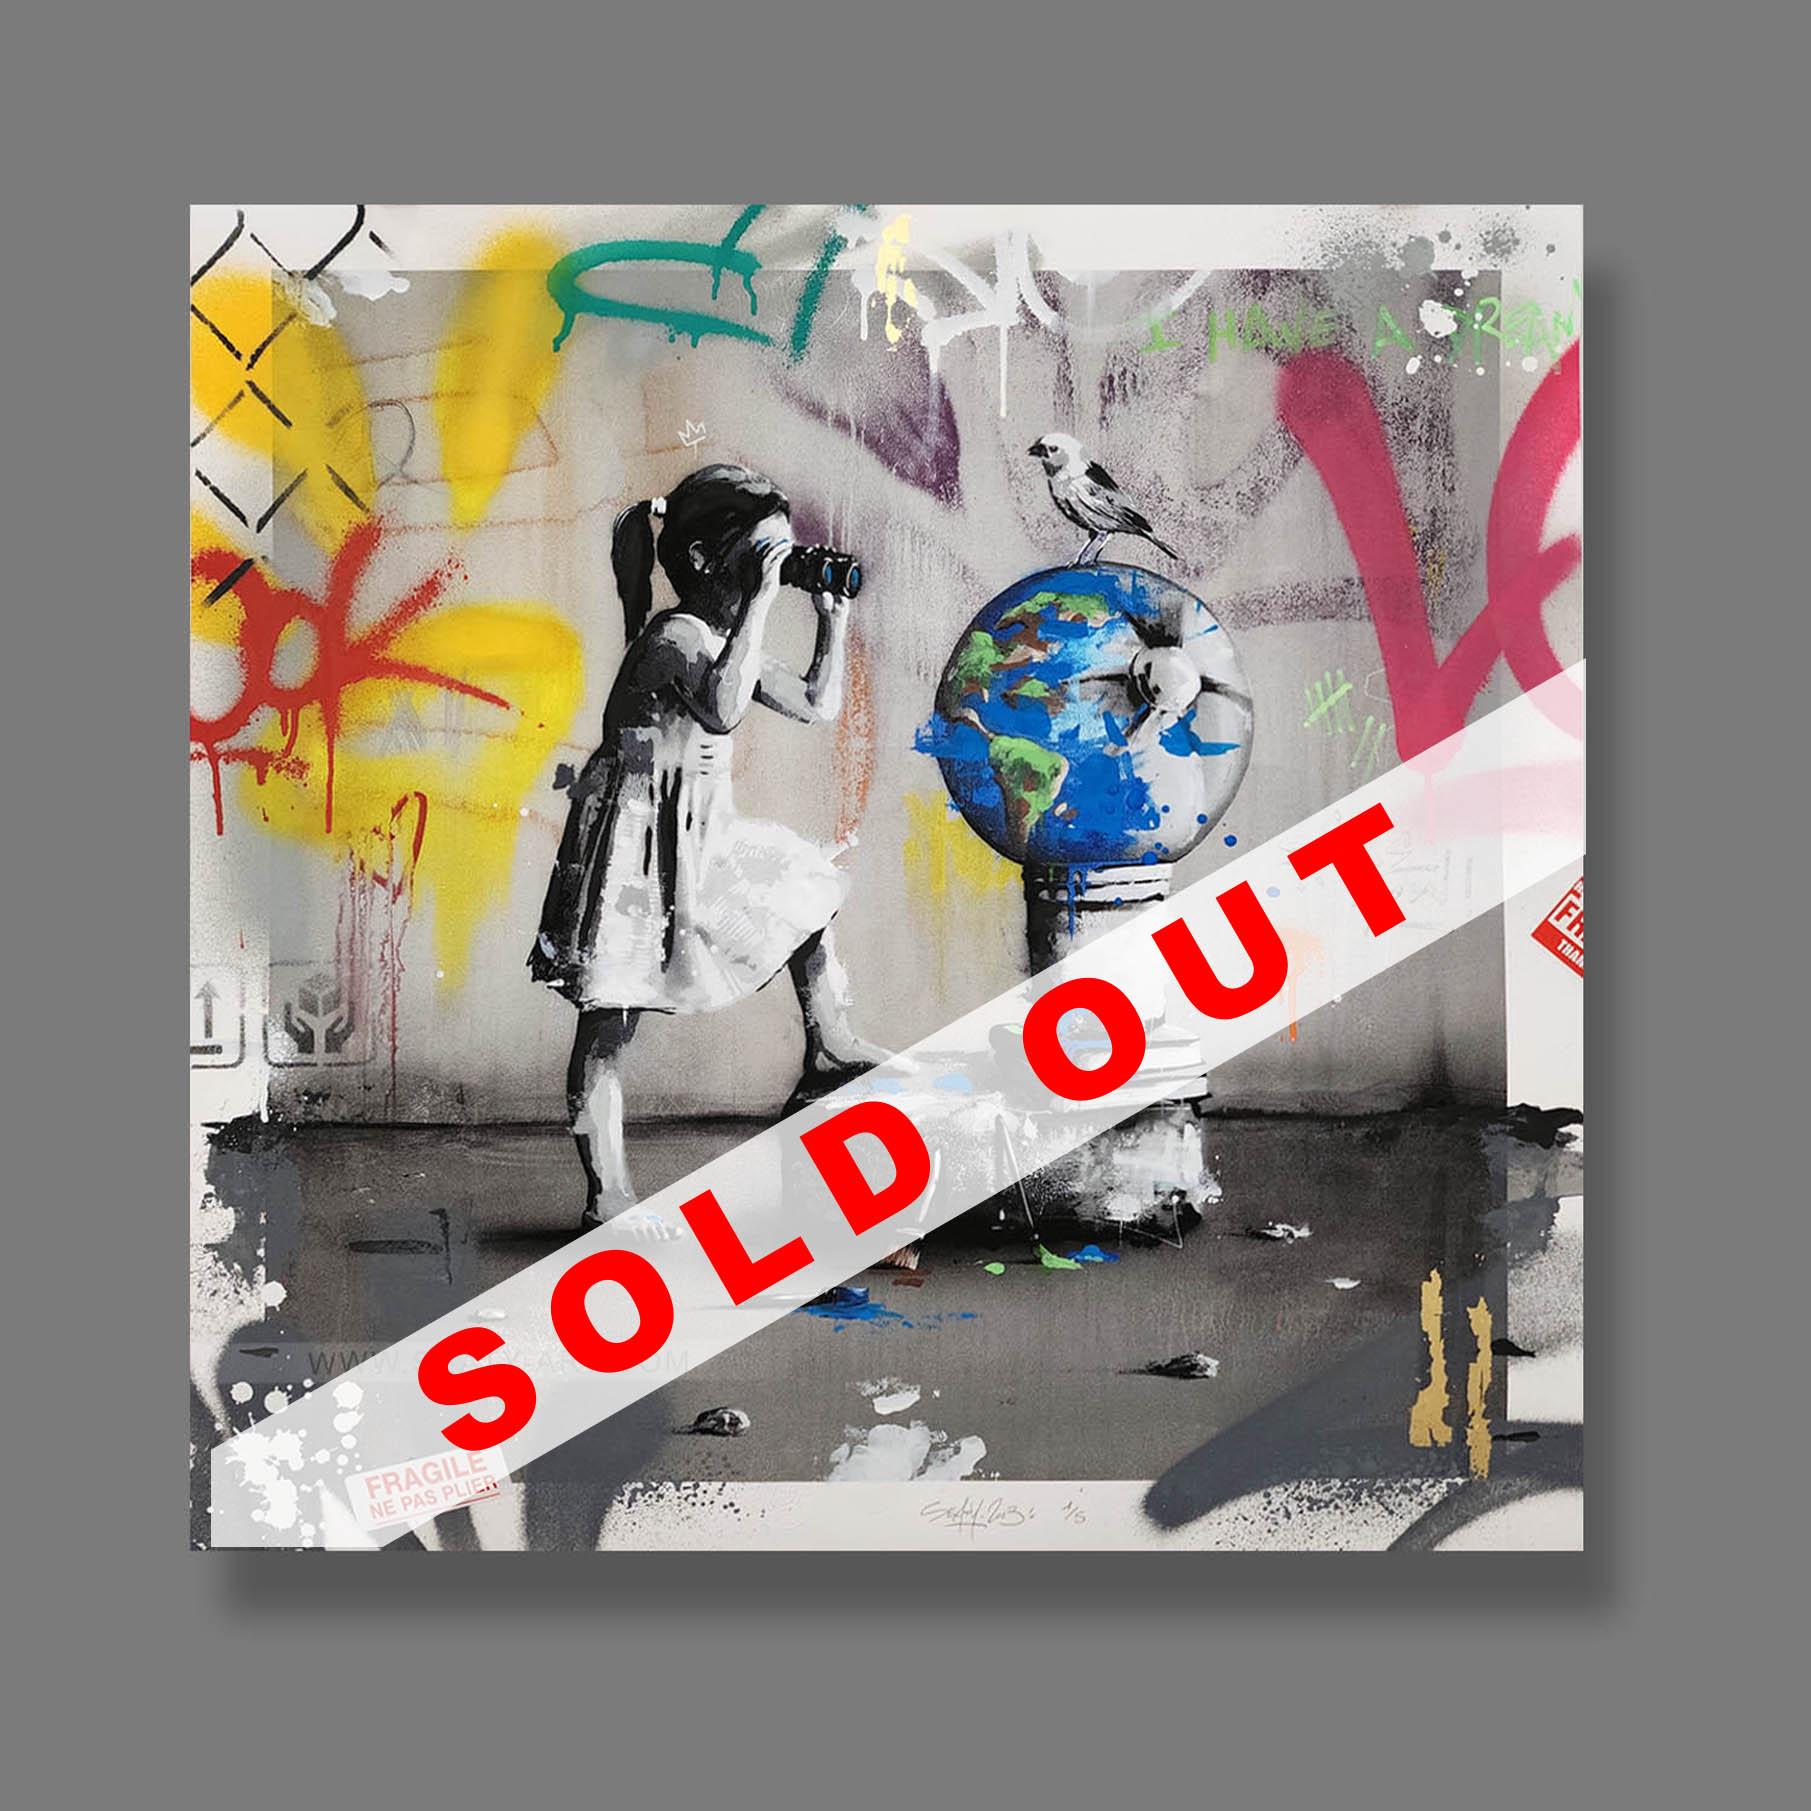 Sold out site 1